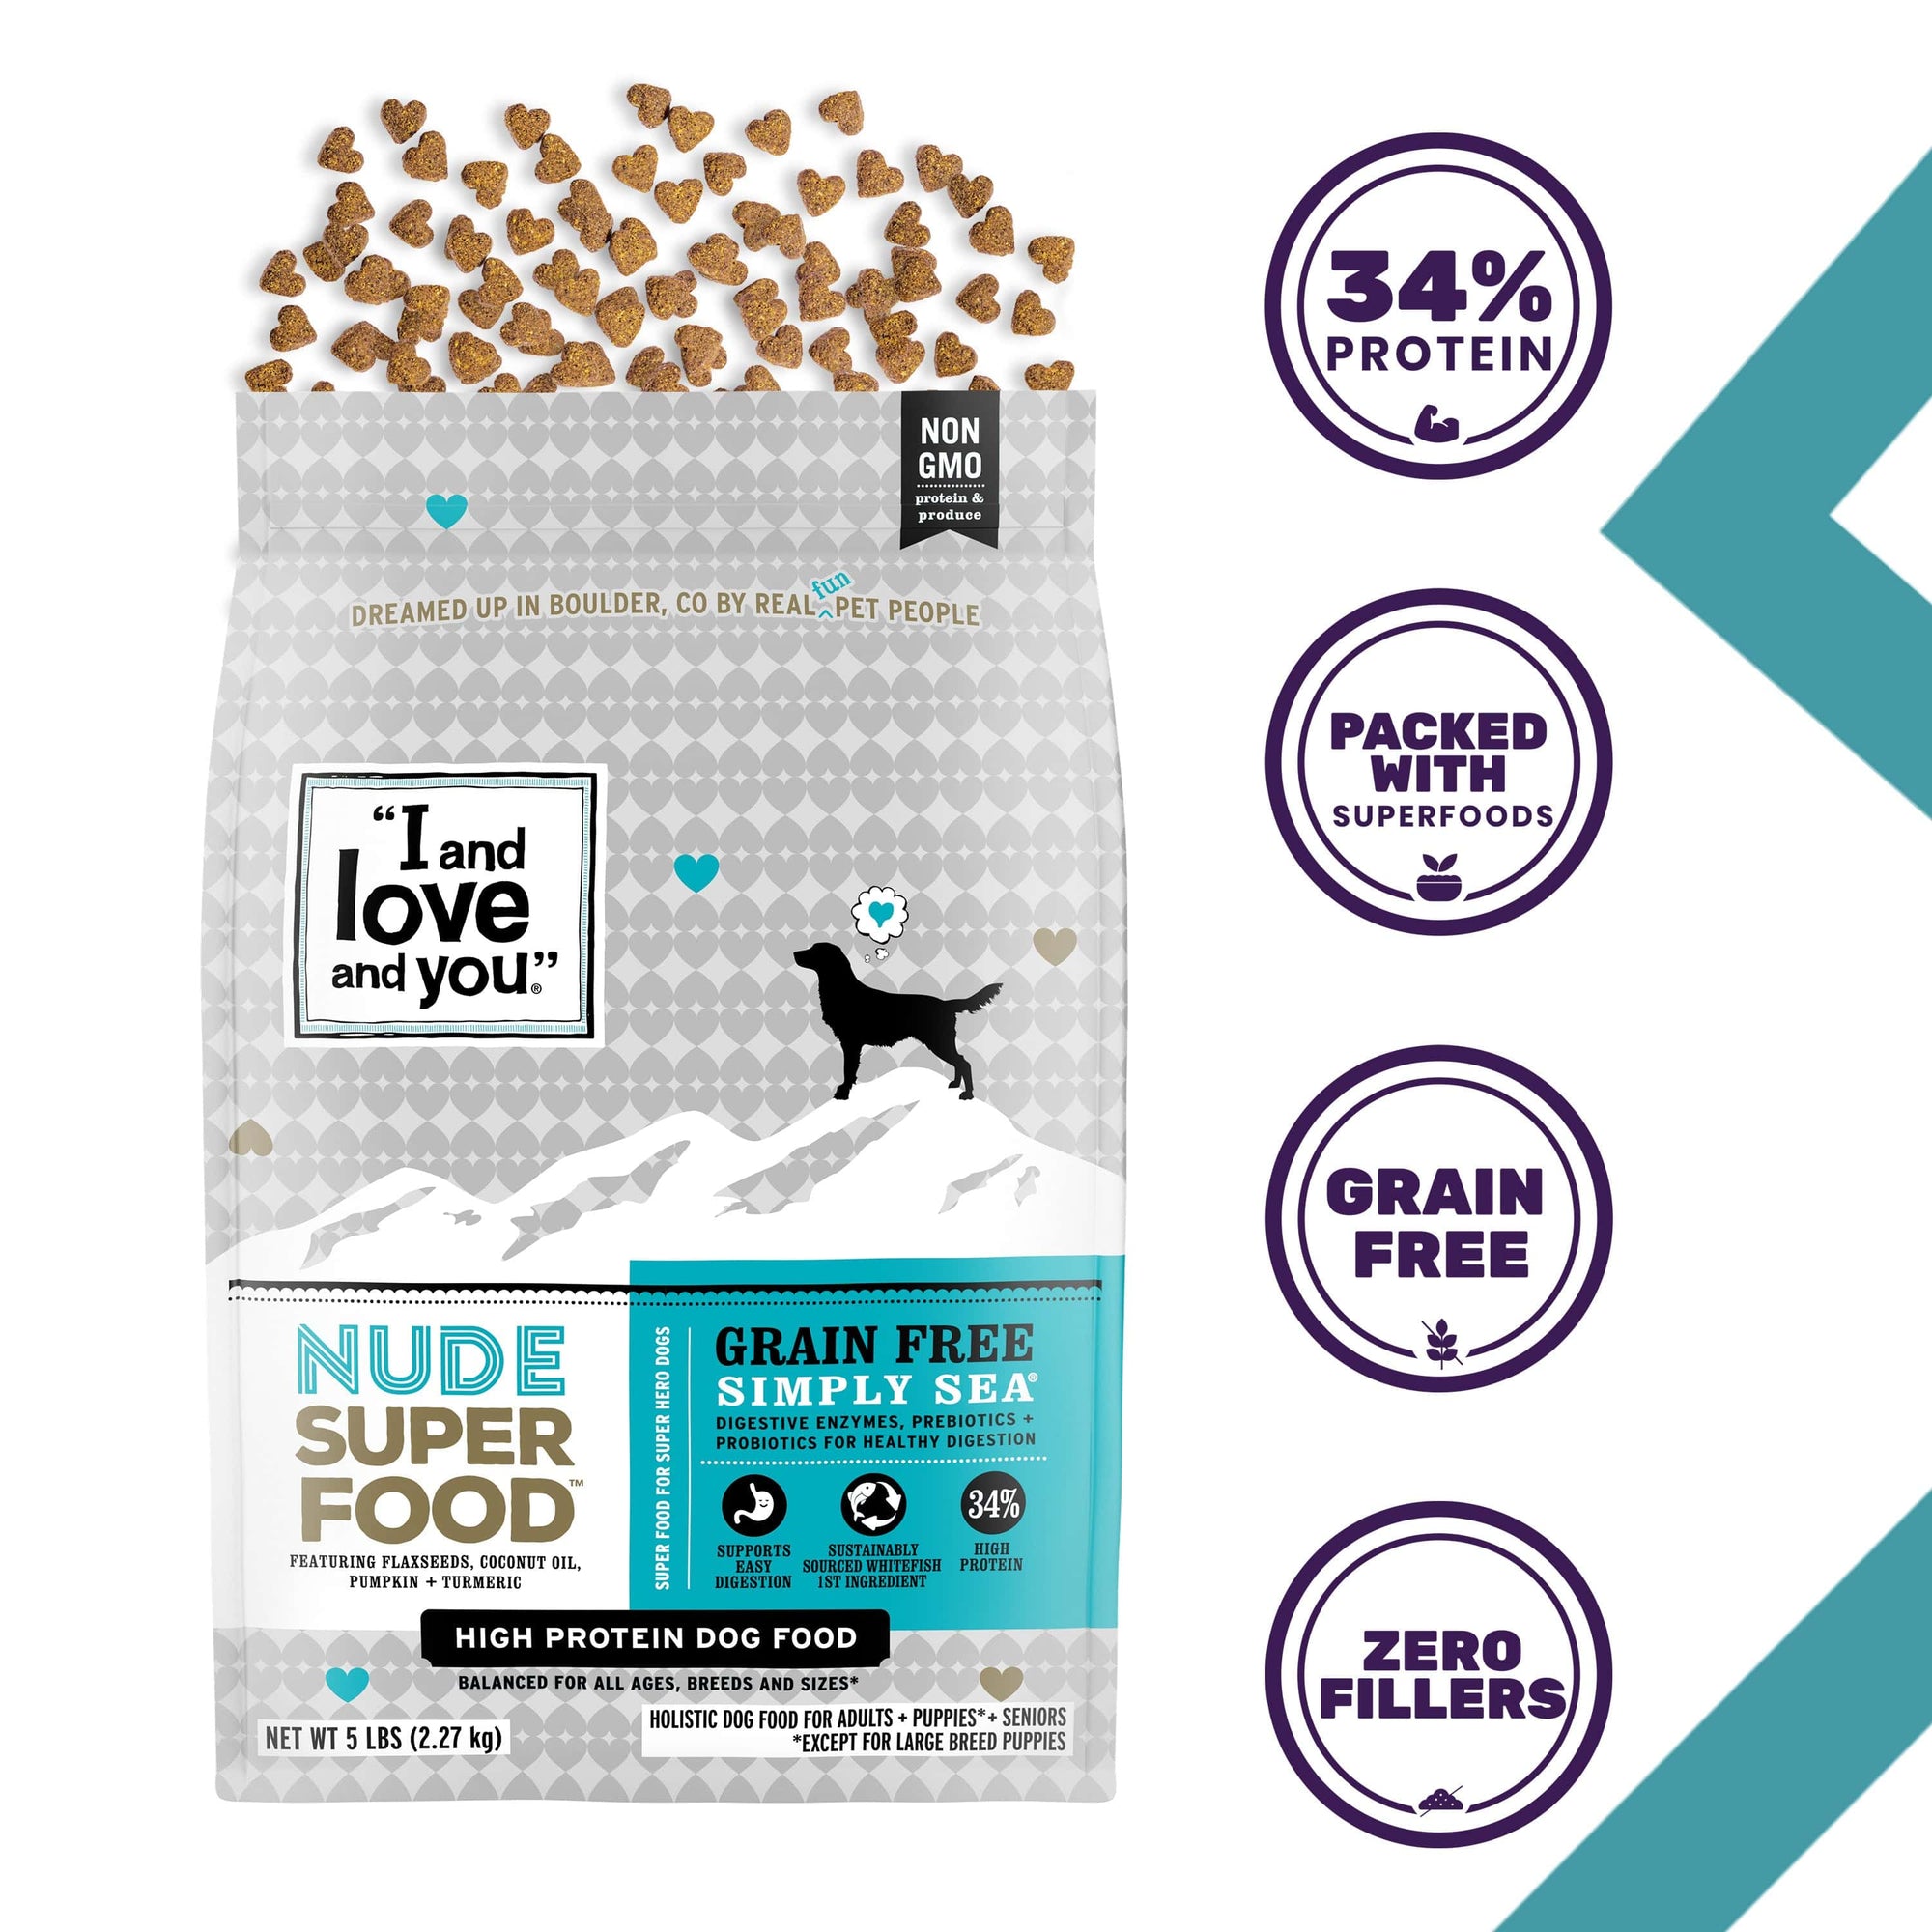 Silhouette of a dog next to a bag of dog food from Nude Super Food - Simply Sea.